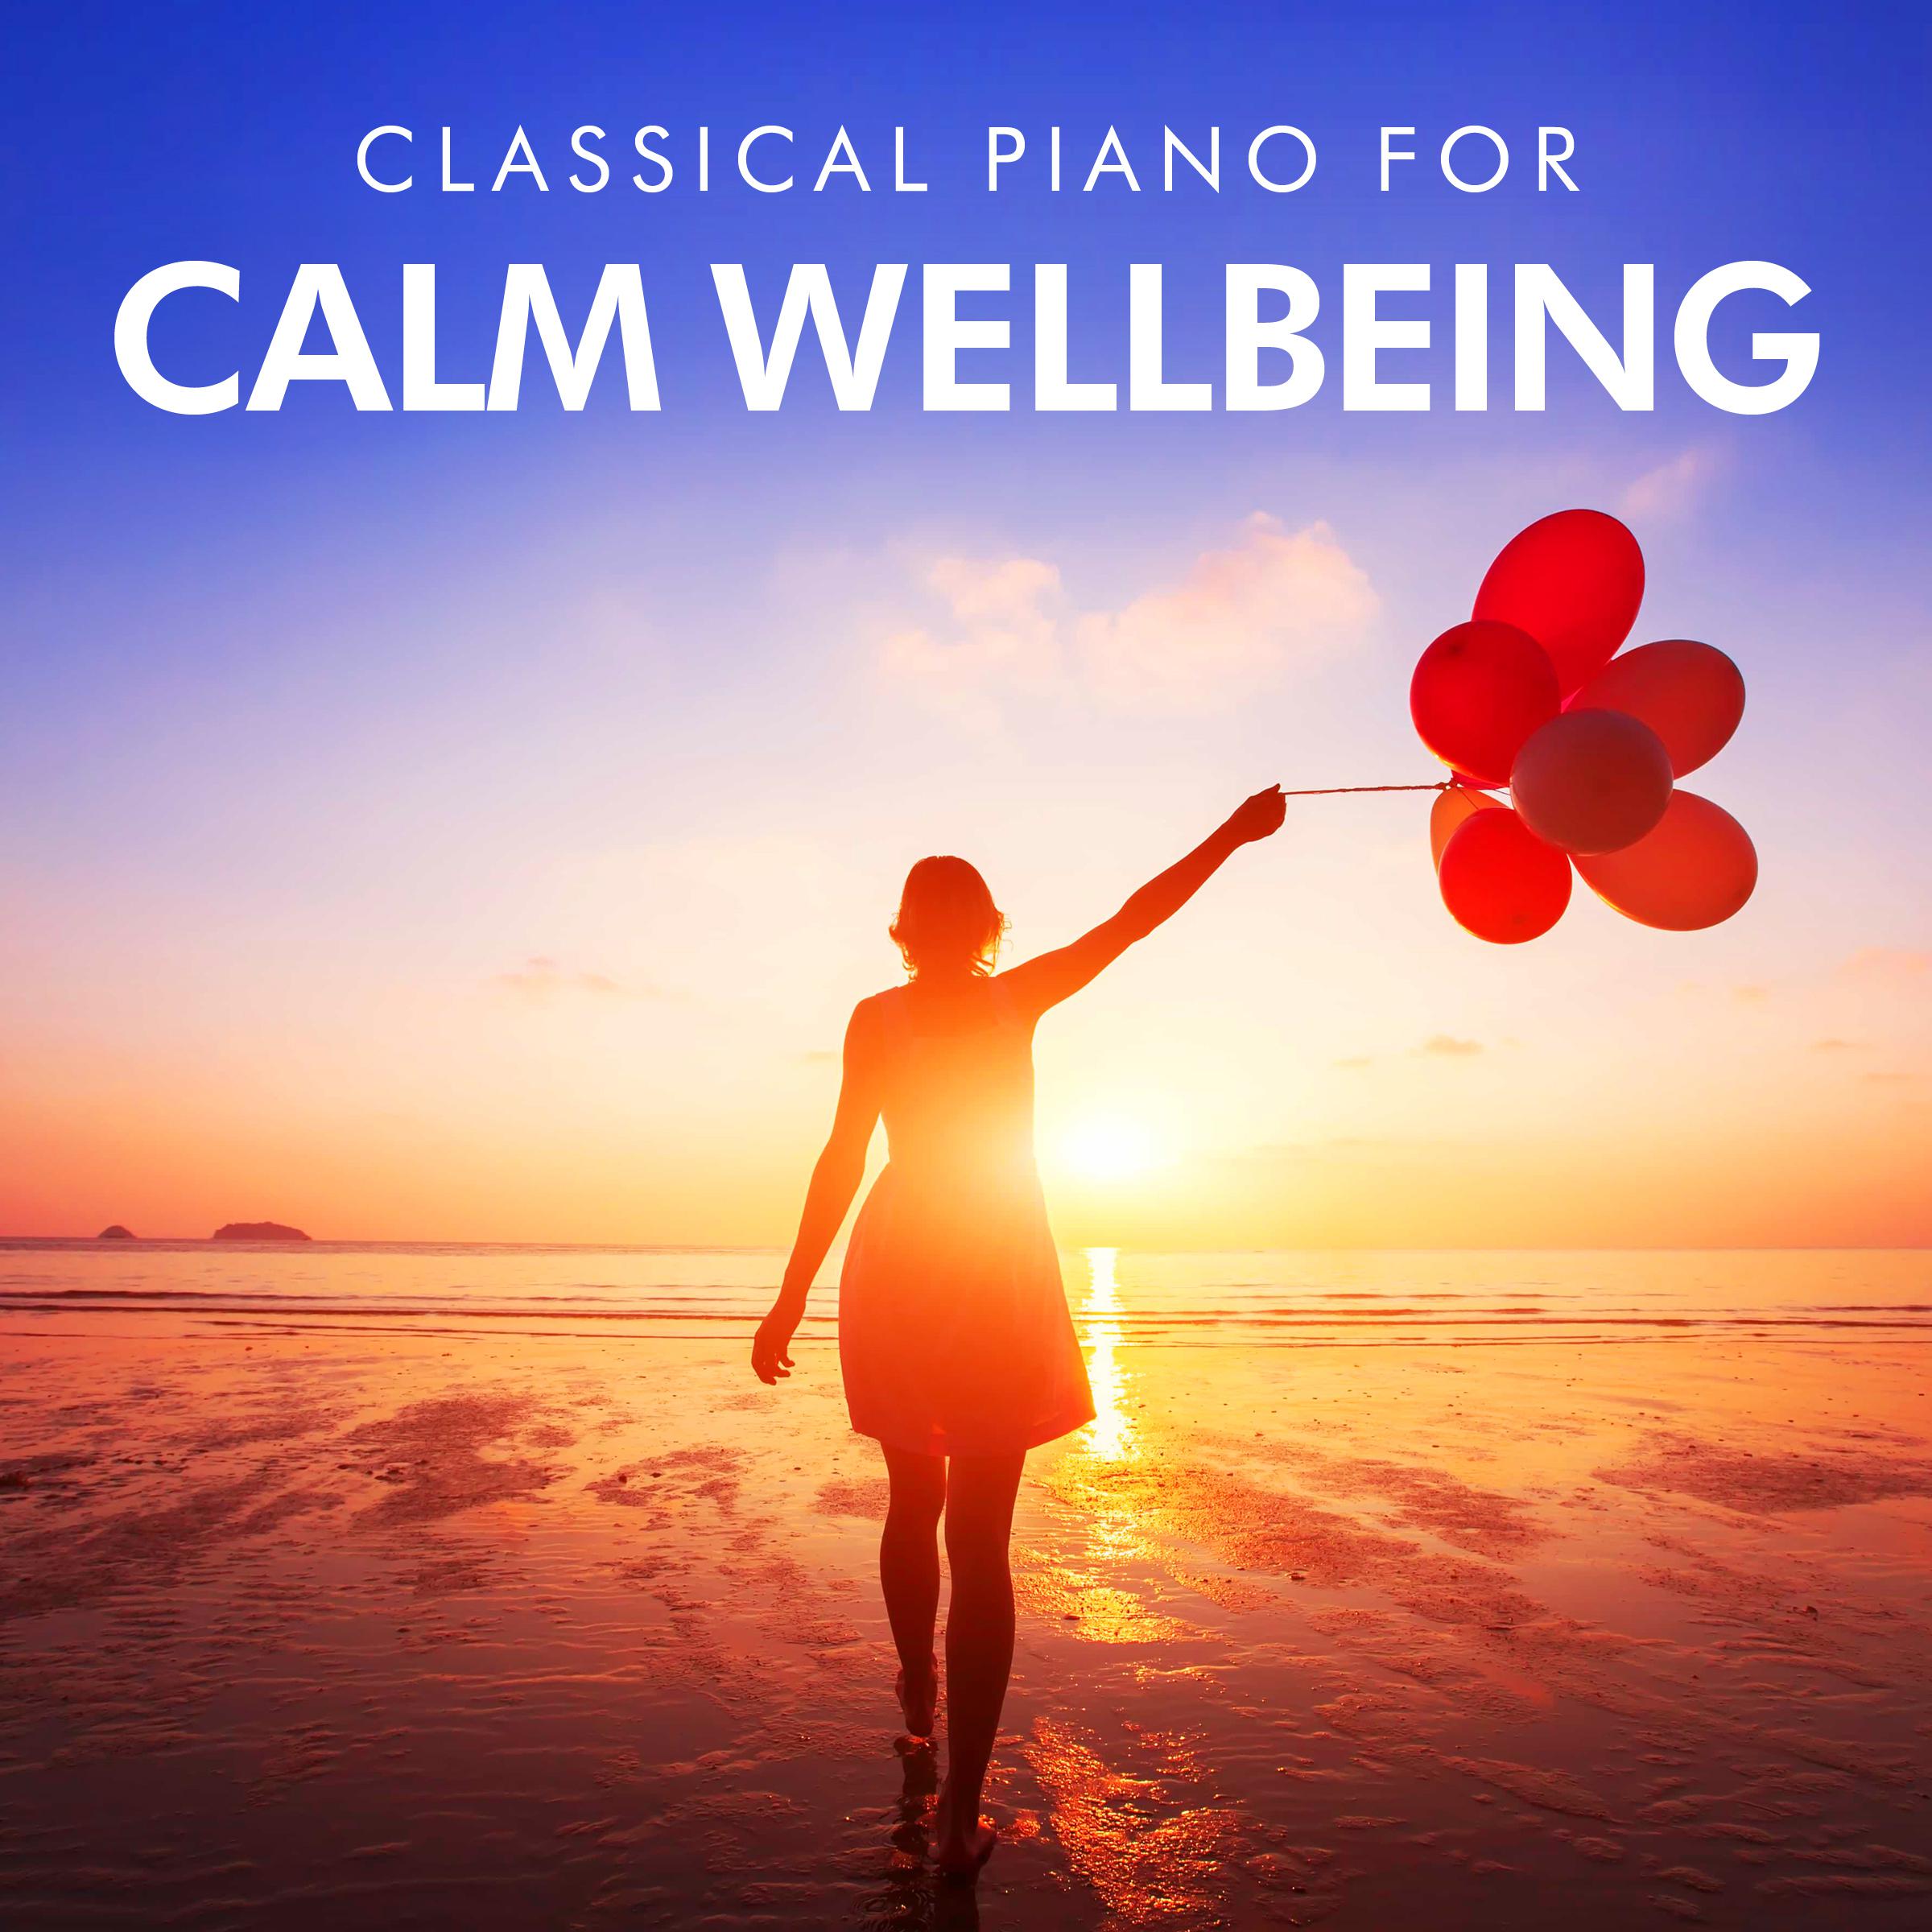 Classical Piano for Calm Wellbeing